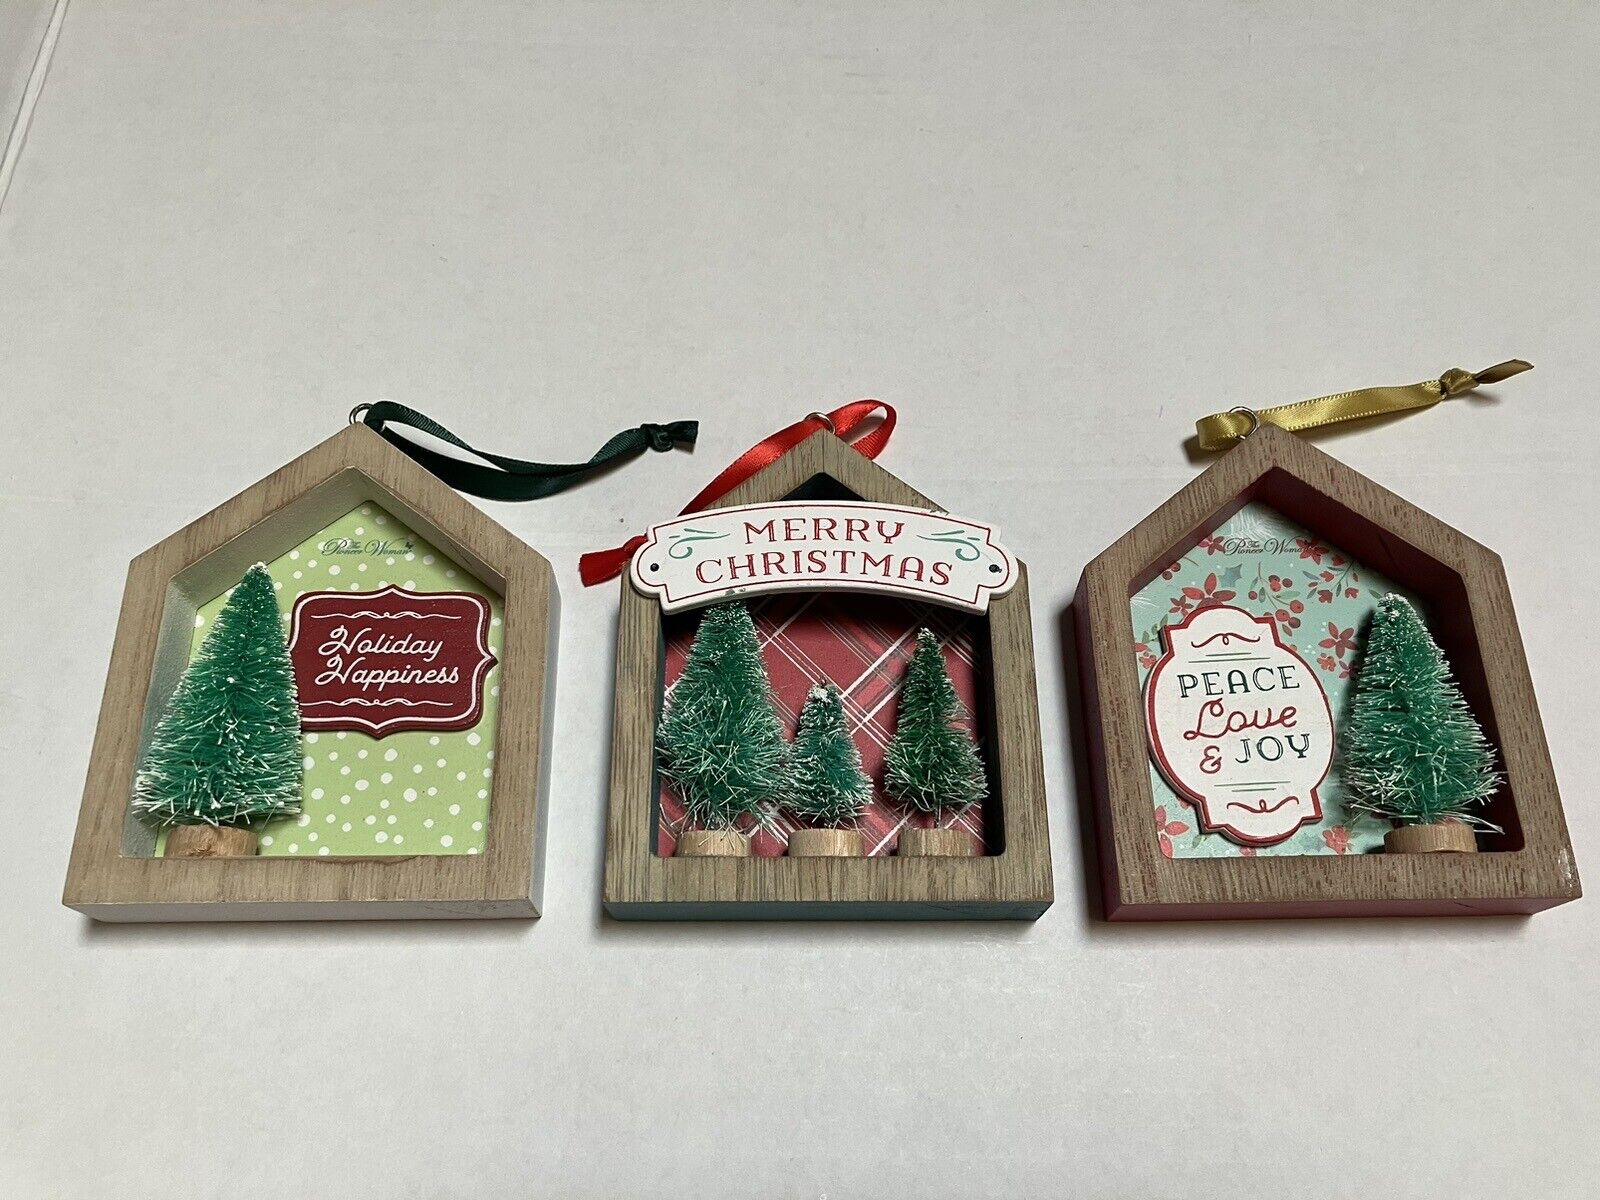 REDUCED. The Pioneer Woman House Shadowbox 3-Piece Ornament Bundle